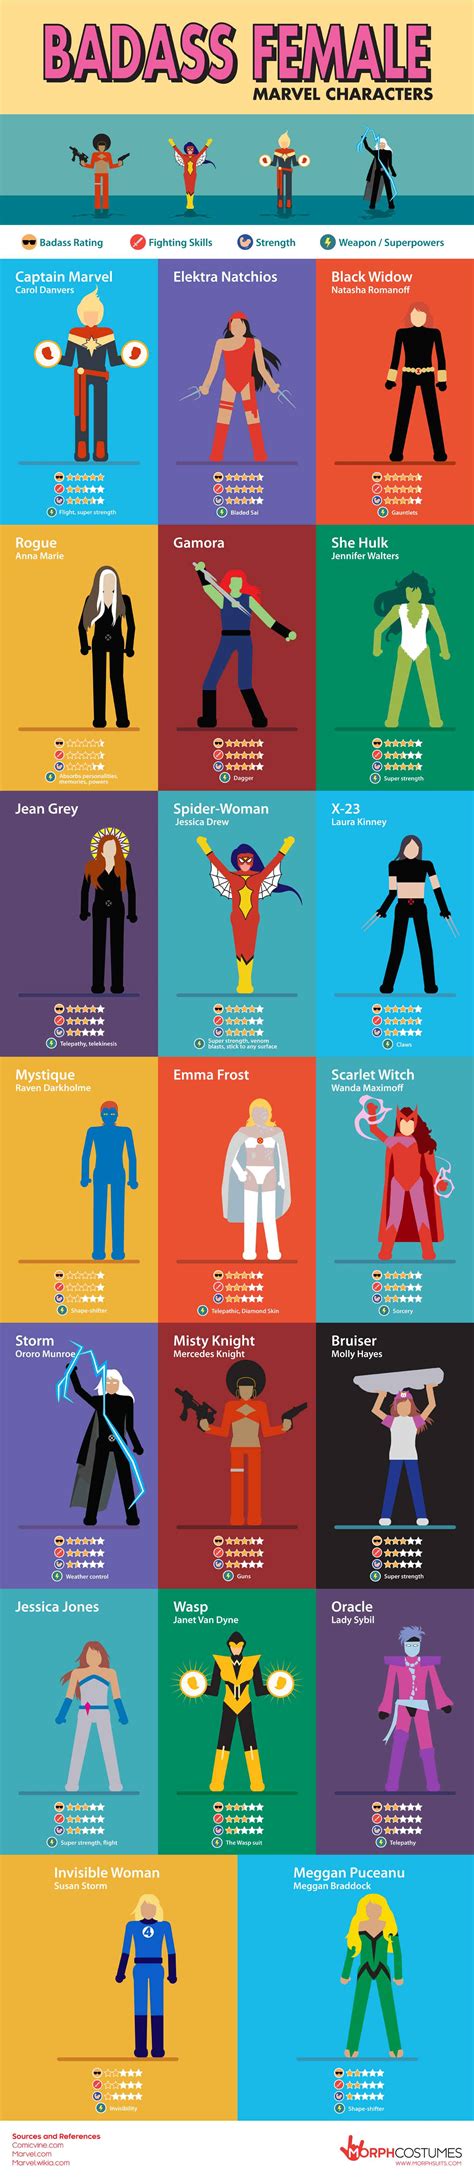 [infographic] Most Badass Female Marvel Characters — Major Spoilers